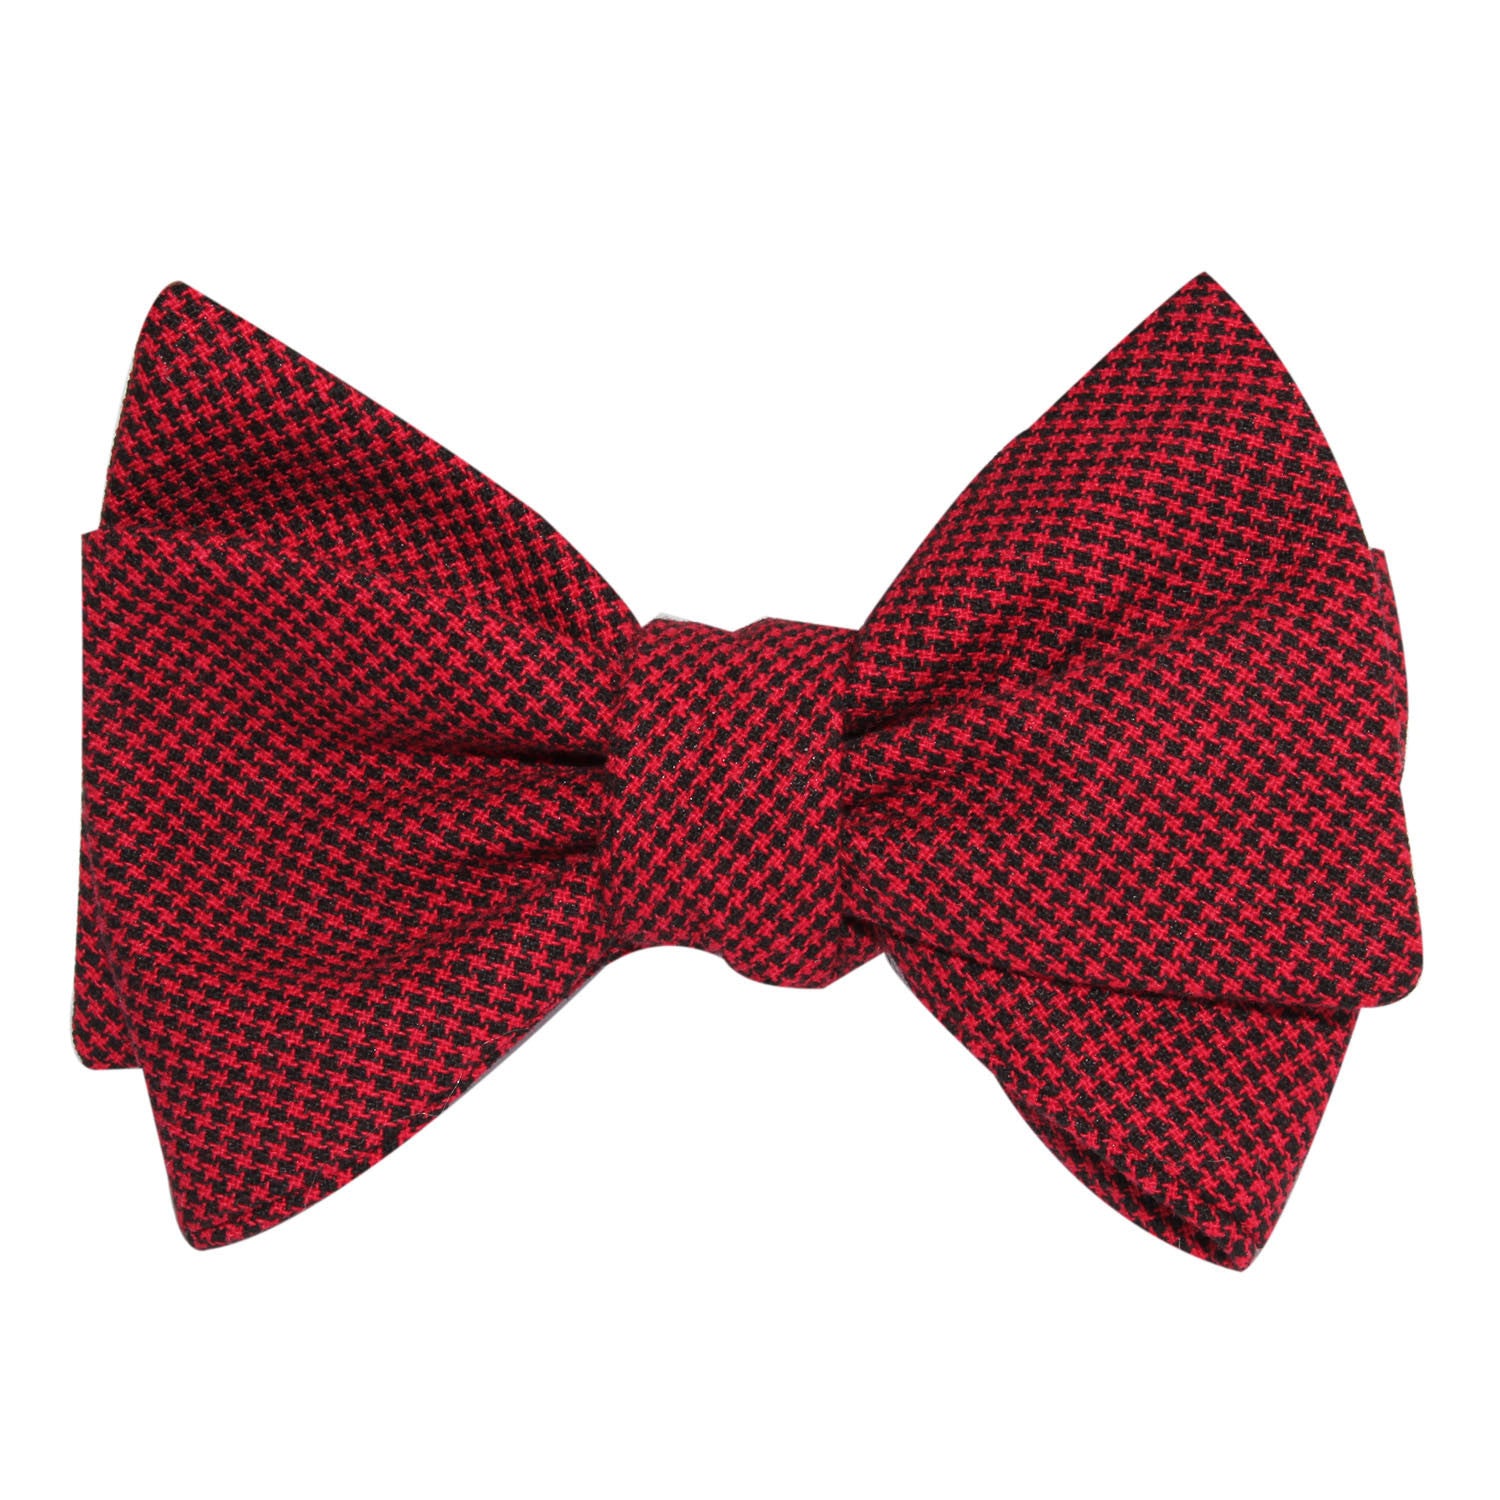 Red Black Houndstooth Cotton Self Tie Bow Tie 2